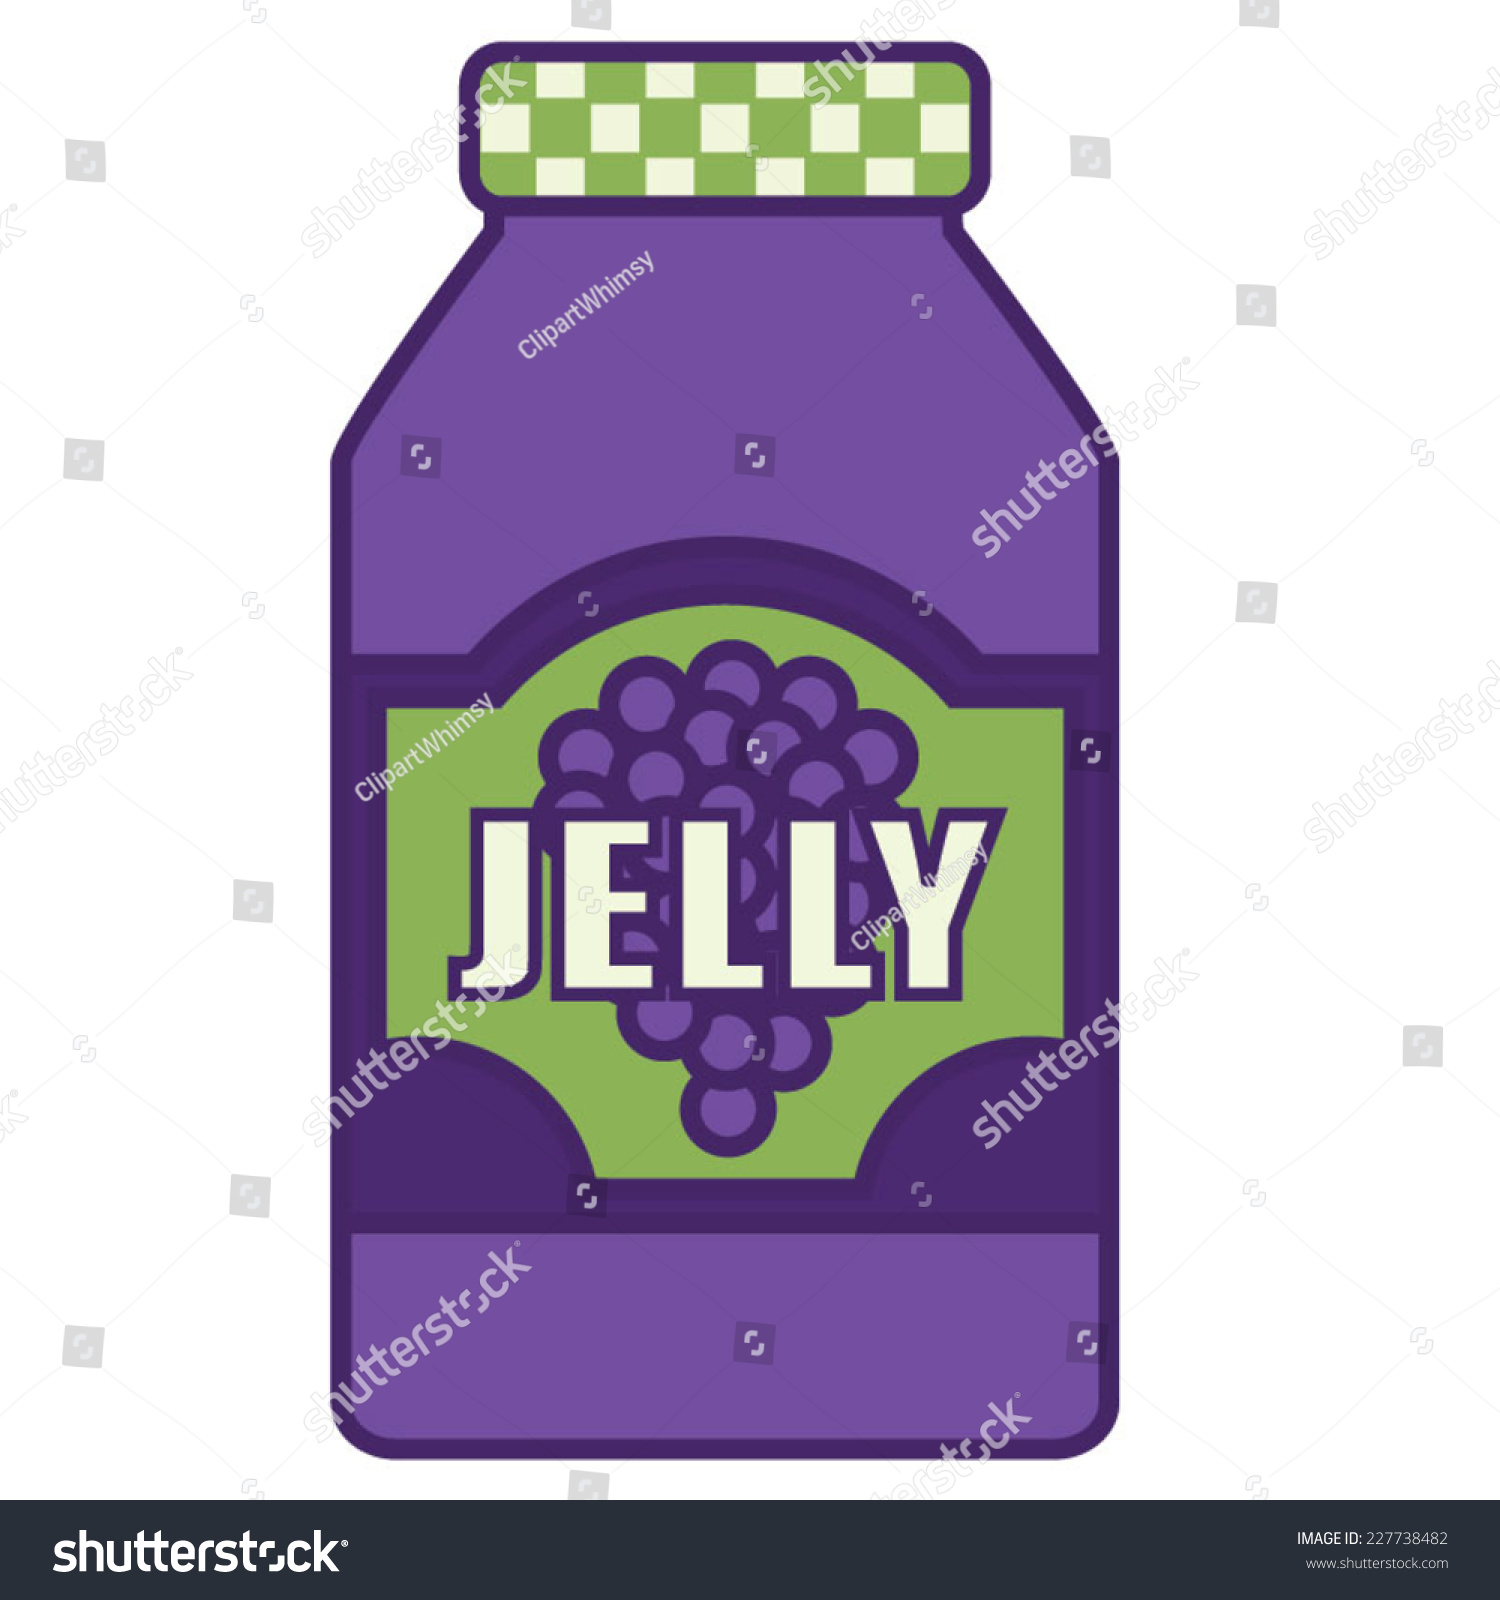 clipart of jelly - photo #50